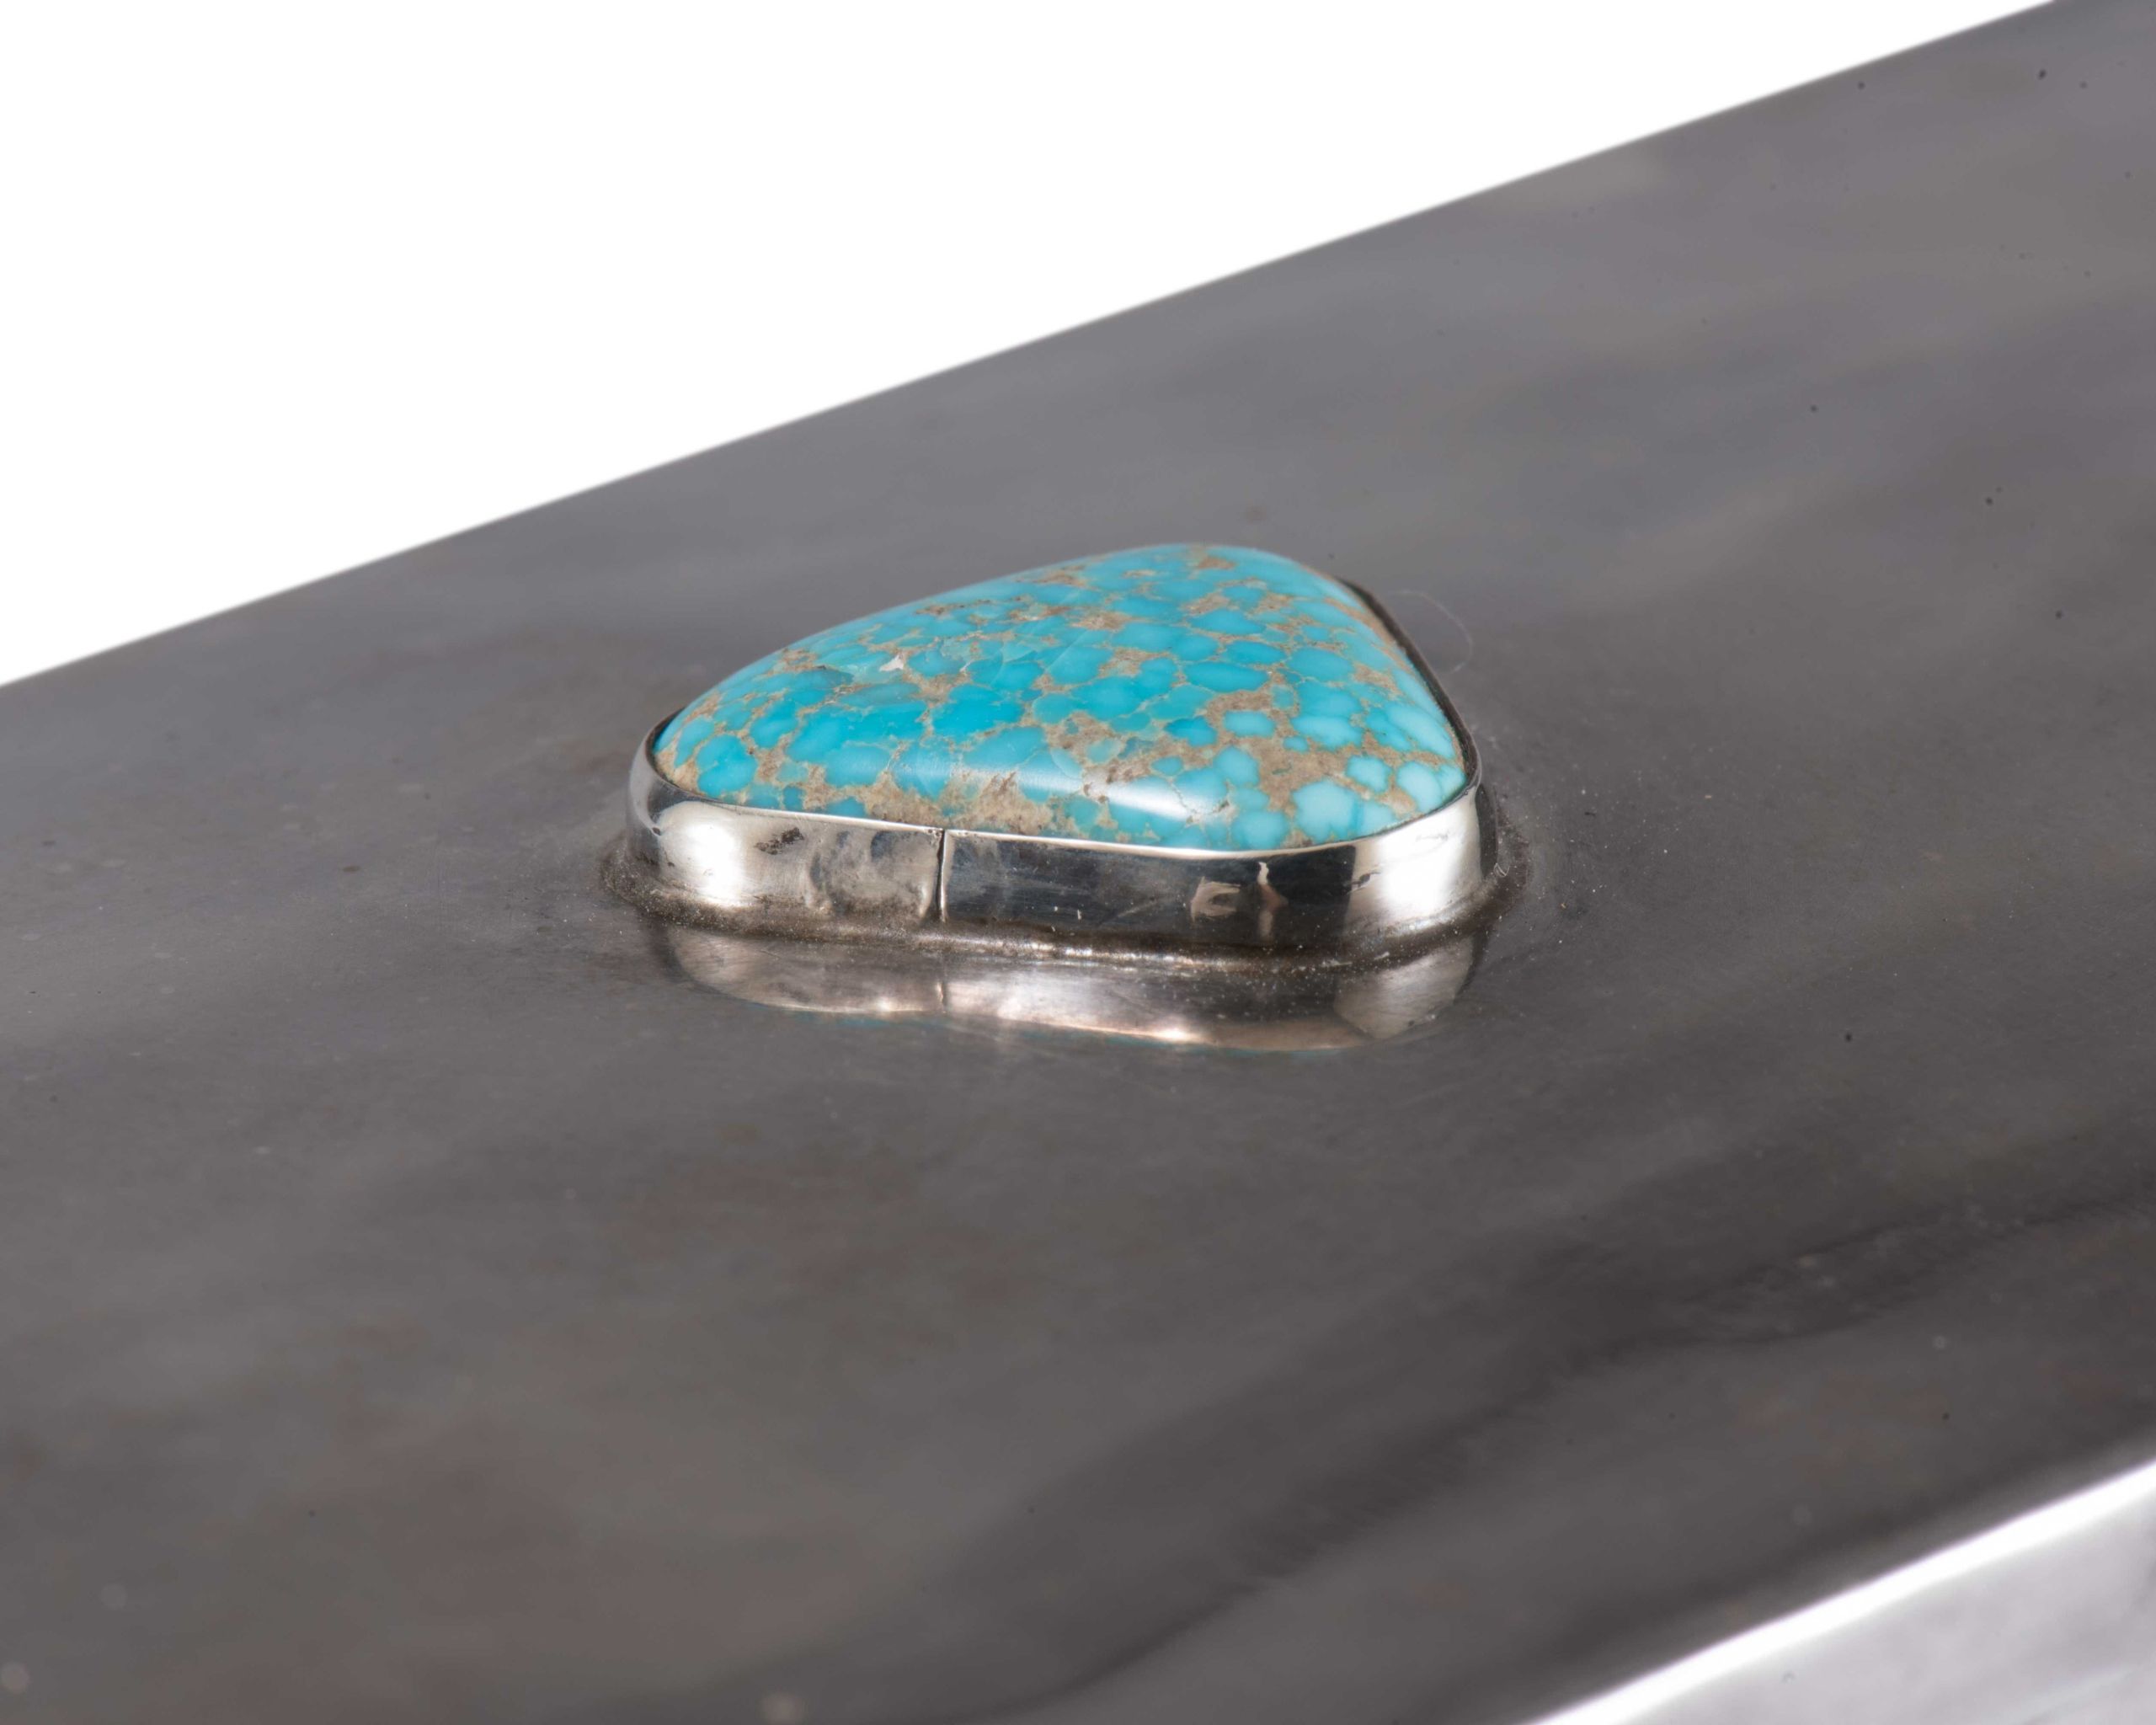 Morris Robinson Silver Box with Turquoise